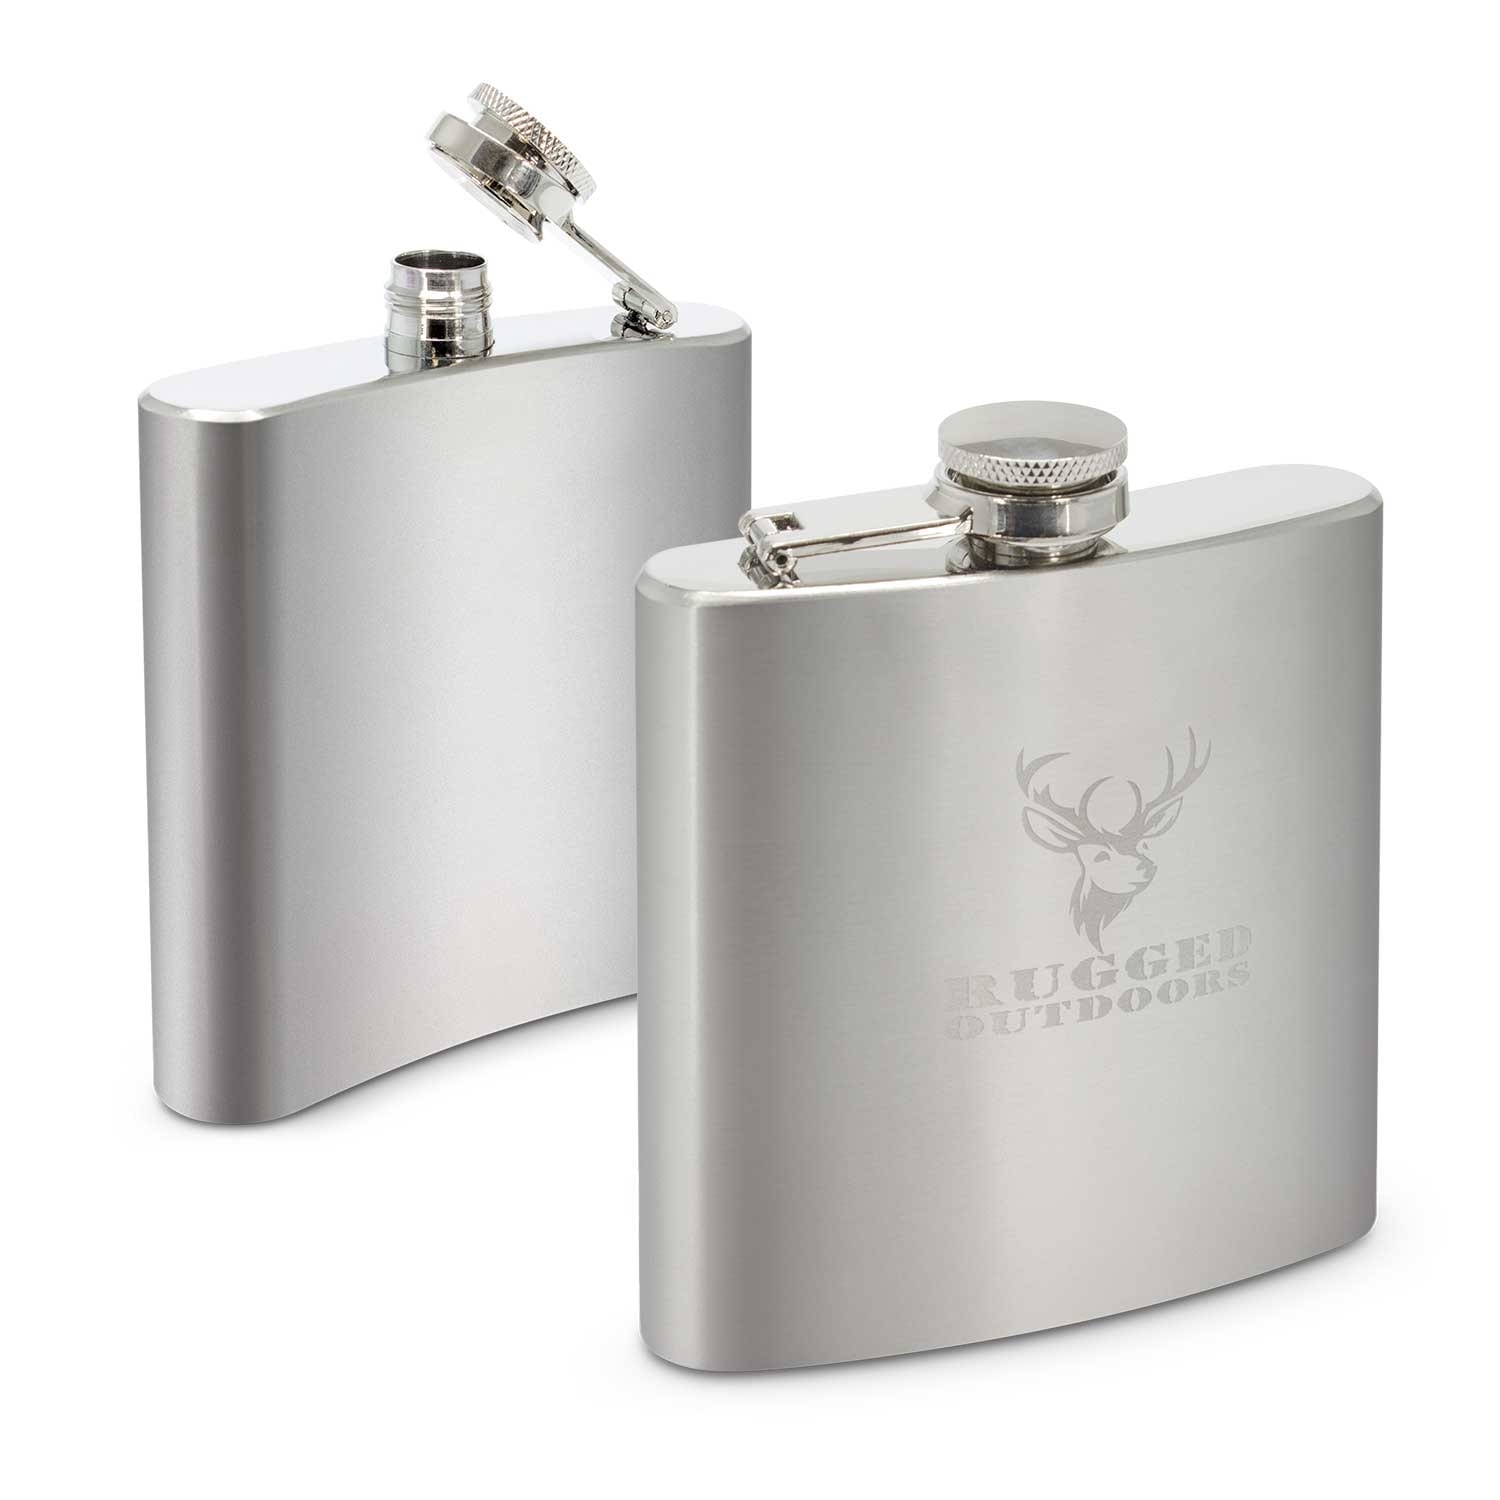 Camping & Outdoors Tennessee Hip Flask Flask